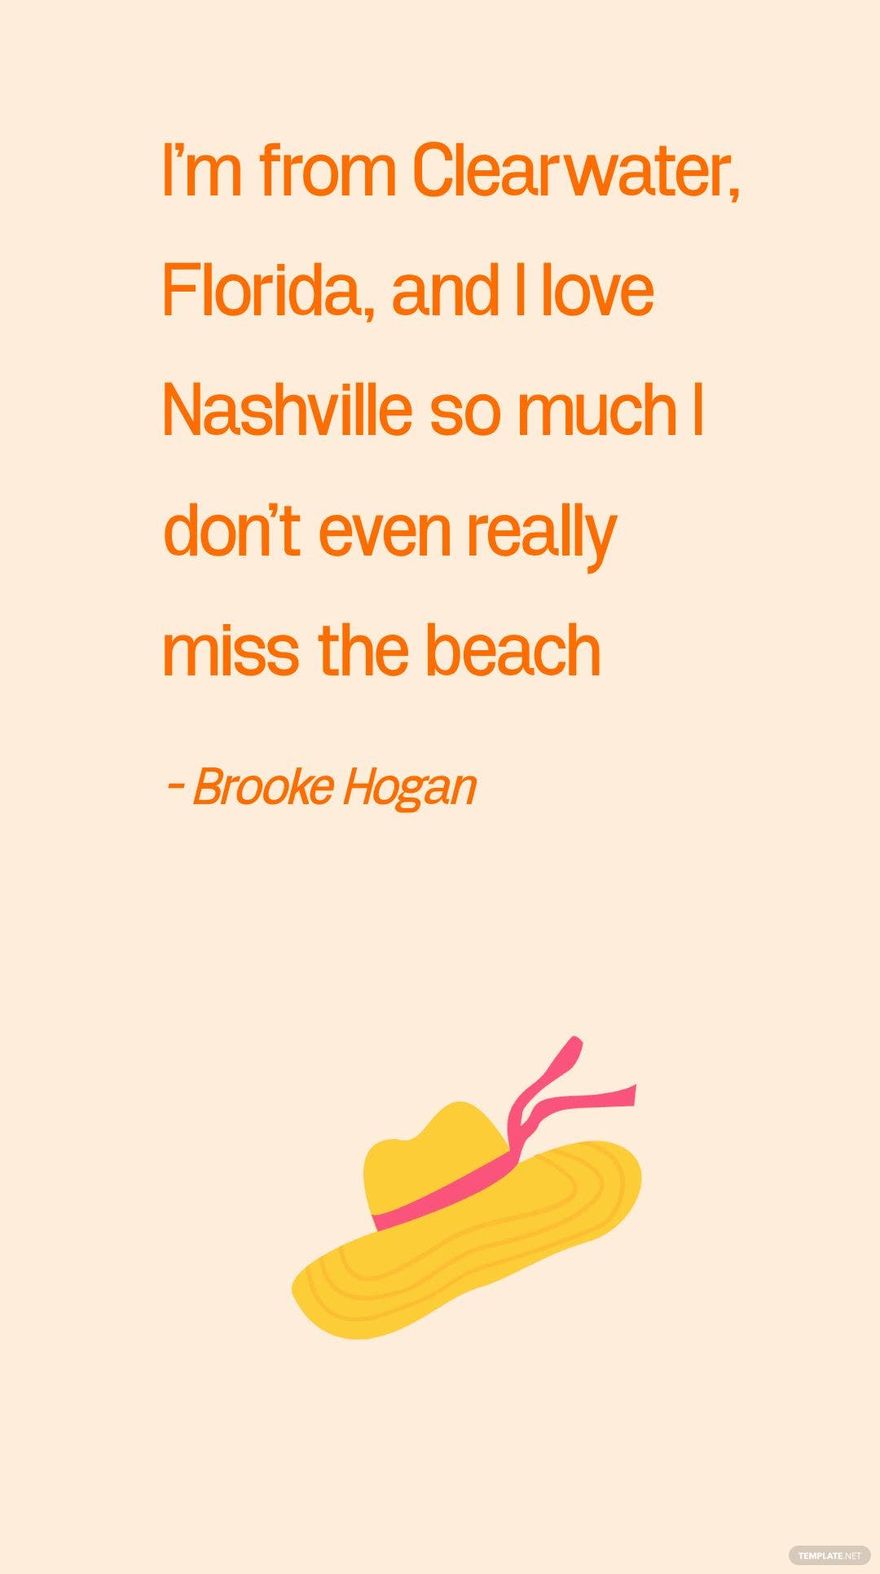 Free Brooke Hogan - I'm from Clearwater, Florida, and I love Nashville so much I don't even really miss the beach in JPG